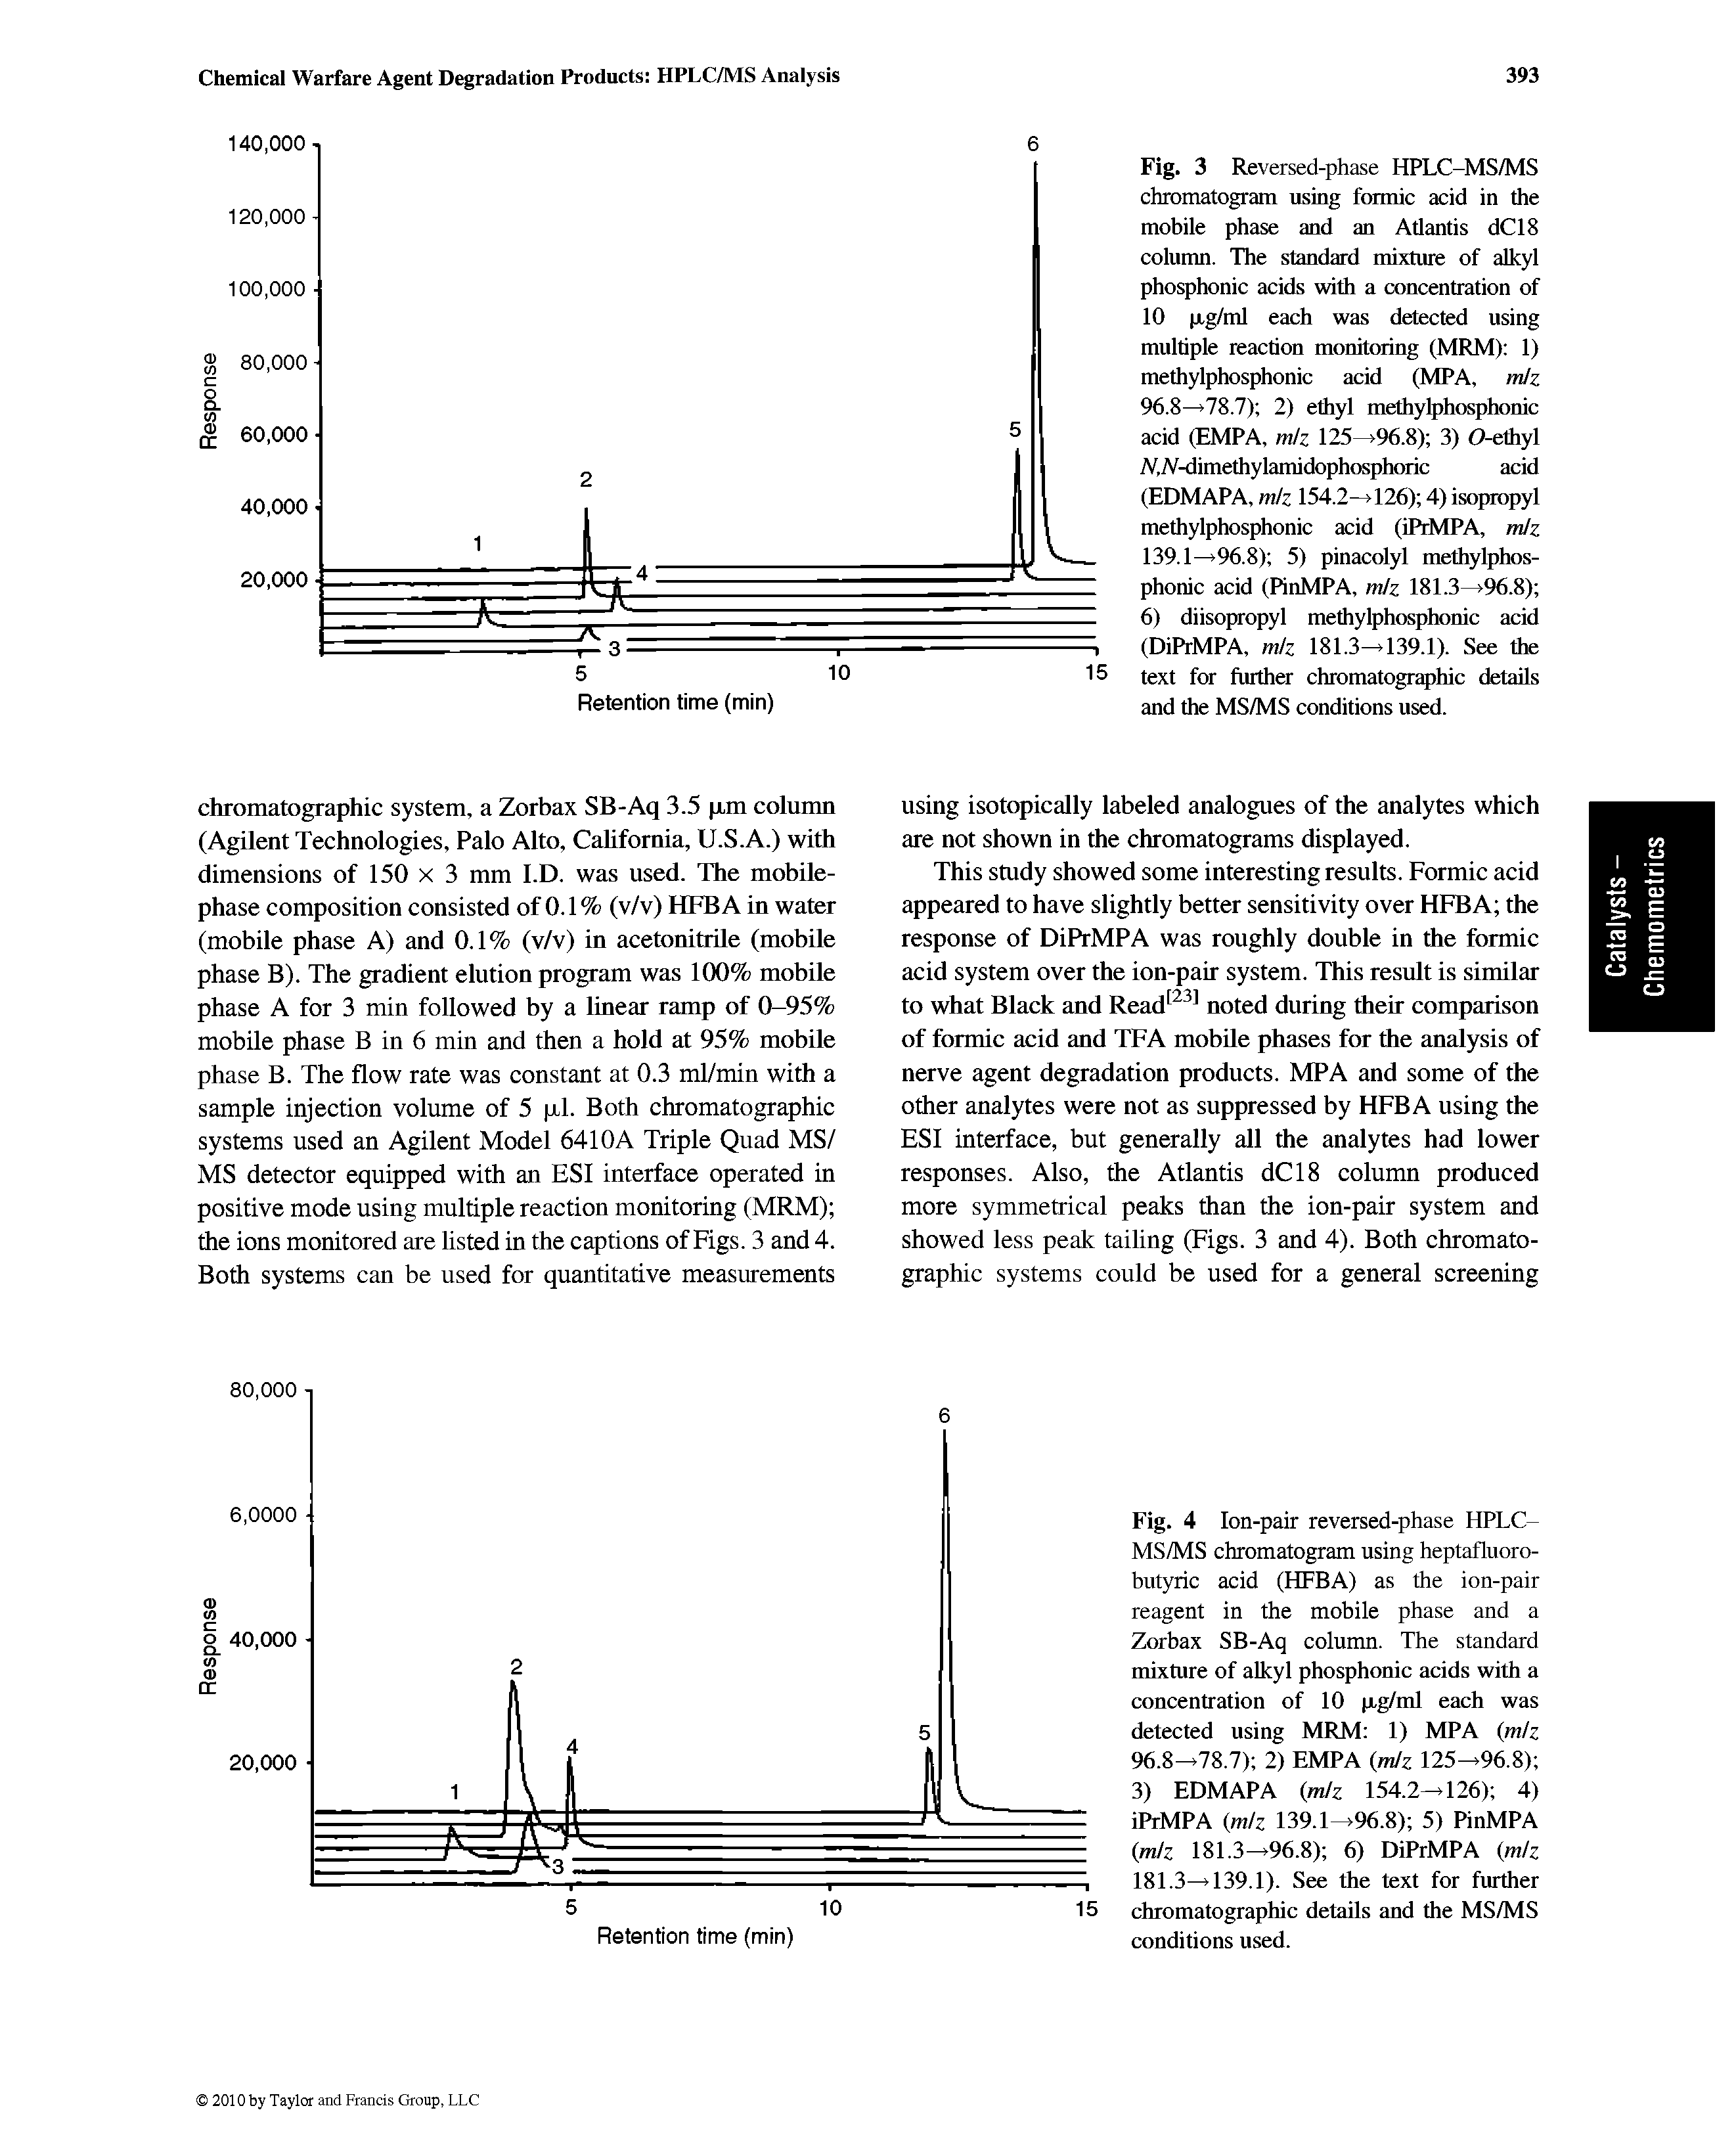 Fig. 3 Reversed-phase HPLC-MS/MS chromatogram using formic acid in the mobile phase and an Atlantis dC18 column. The standard mixture of alkyl phosphonic acids with a concentration of 10 p,g/ml each was detected using multiple reaction monitoring (MRM) 1) methylphosphonic acid (MPA, miz 96.8 78.7) 2) ethyl methylphosphonic acid (EMPA, mIz 125 96.8) 3) C>-elhyl A,A-dimethylamidophosphoric add (EDMAPA, miz 154.2—>126) 4) isopropyl methylphosphonic acid (iPrMPA, nJz 139.1 %.8) 5) pinacolyl methylphosphonic acid (PinMPA, miz 181.3- 96.8) 6) diisopropyl methylphosphonic add (DiPrMPA, mk 181.3 139.1). See the text for further chromatogr hic details and the MS/MS conditions used.